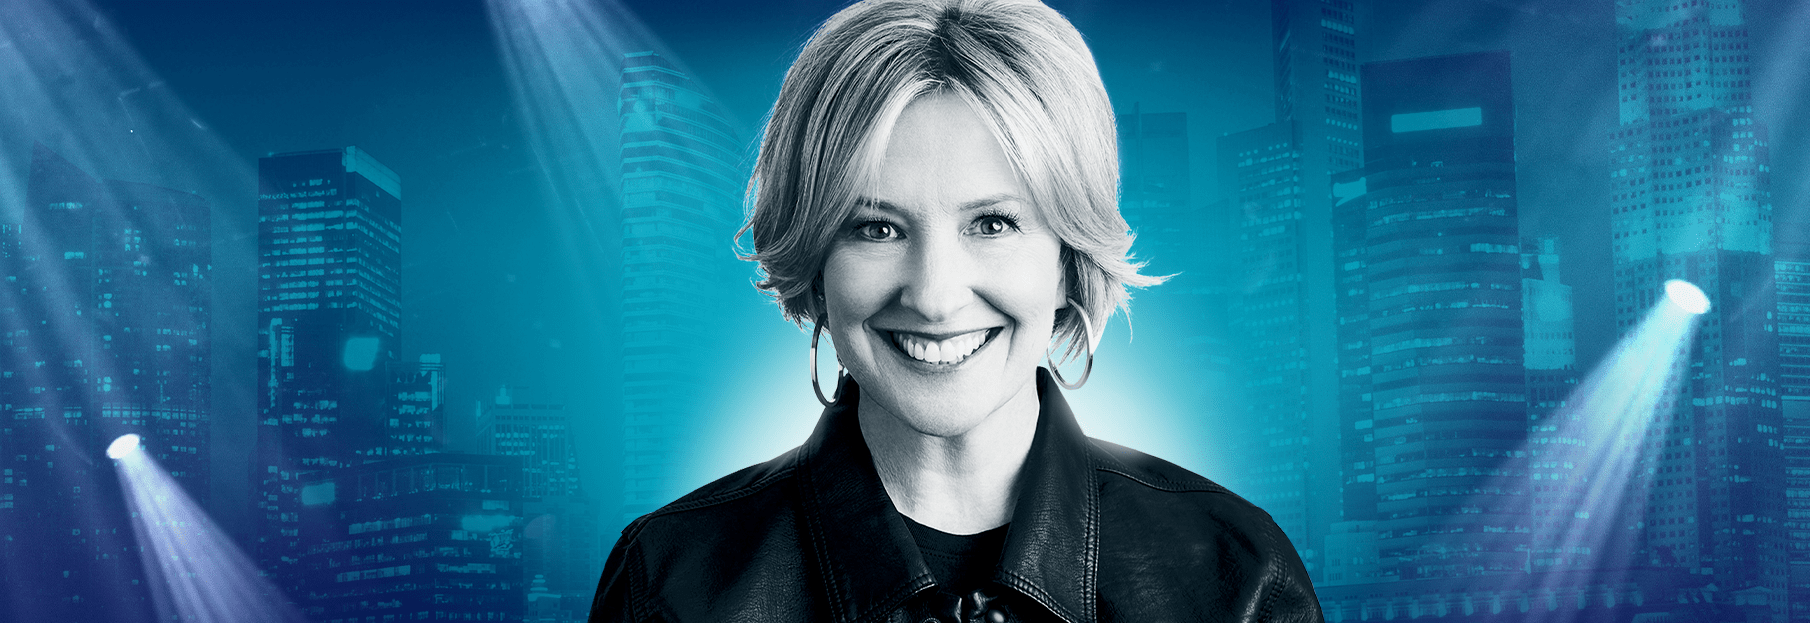 BRAND MINDS 2020 speakers: Brené Brown, Researcher & Bestselling Author